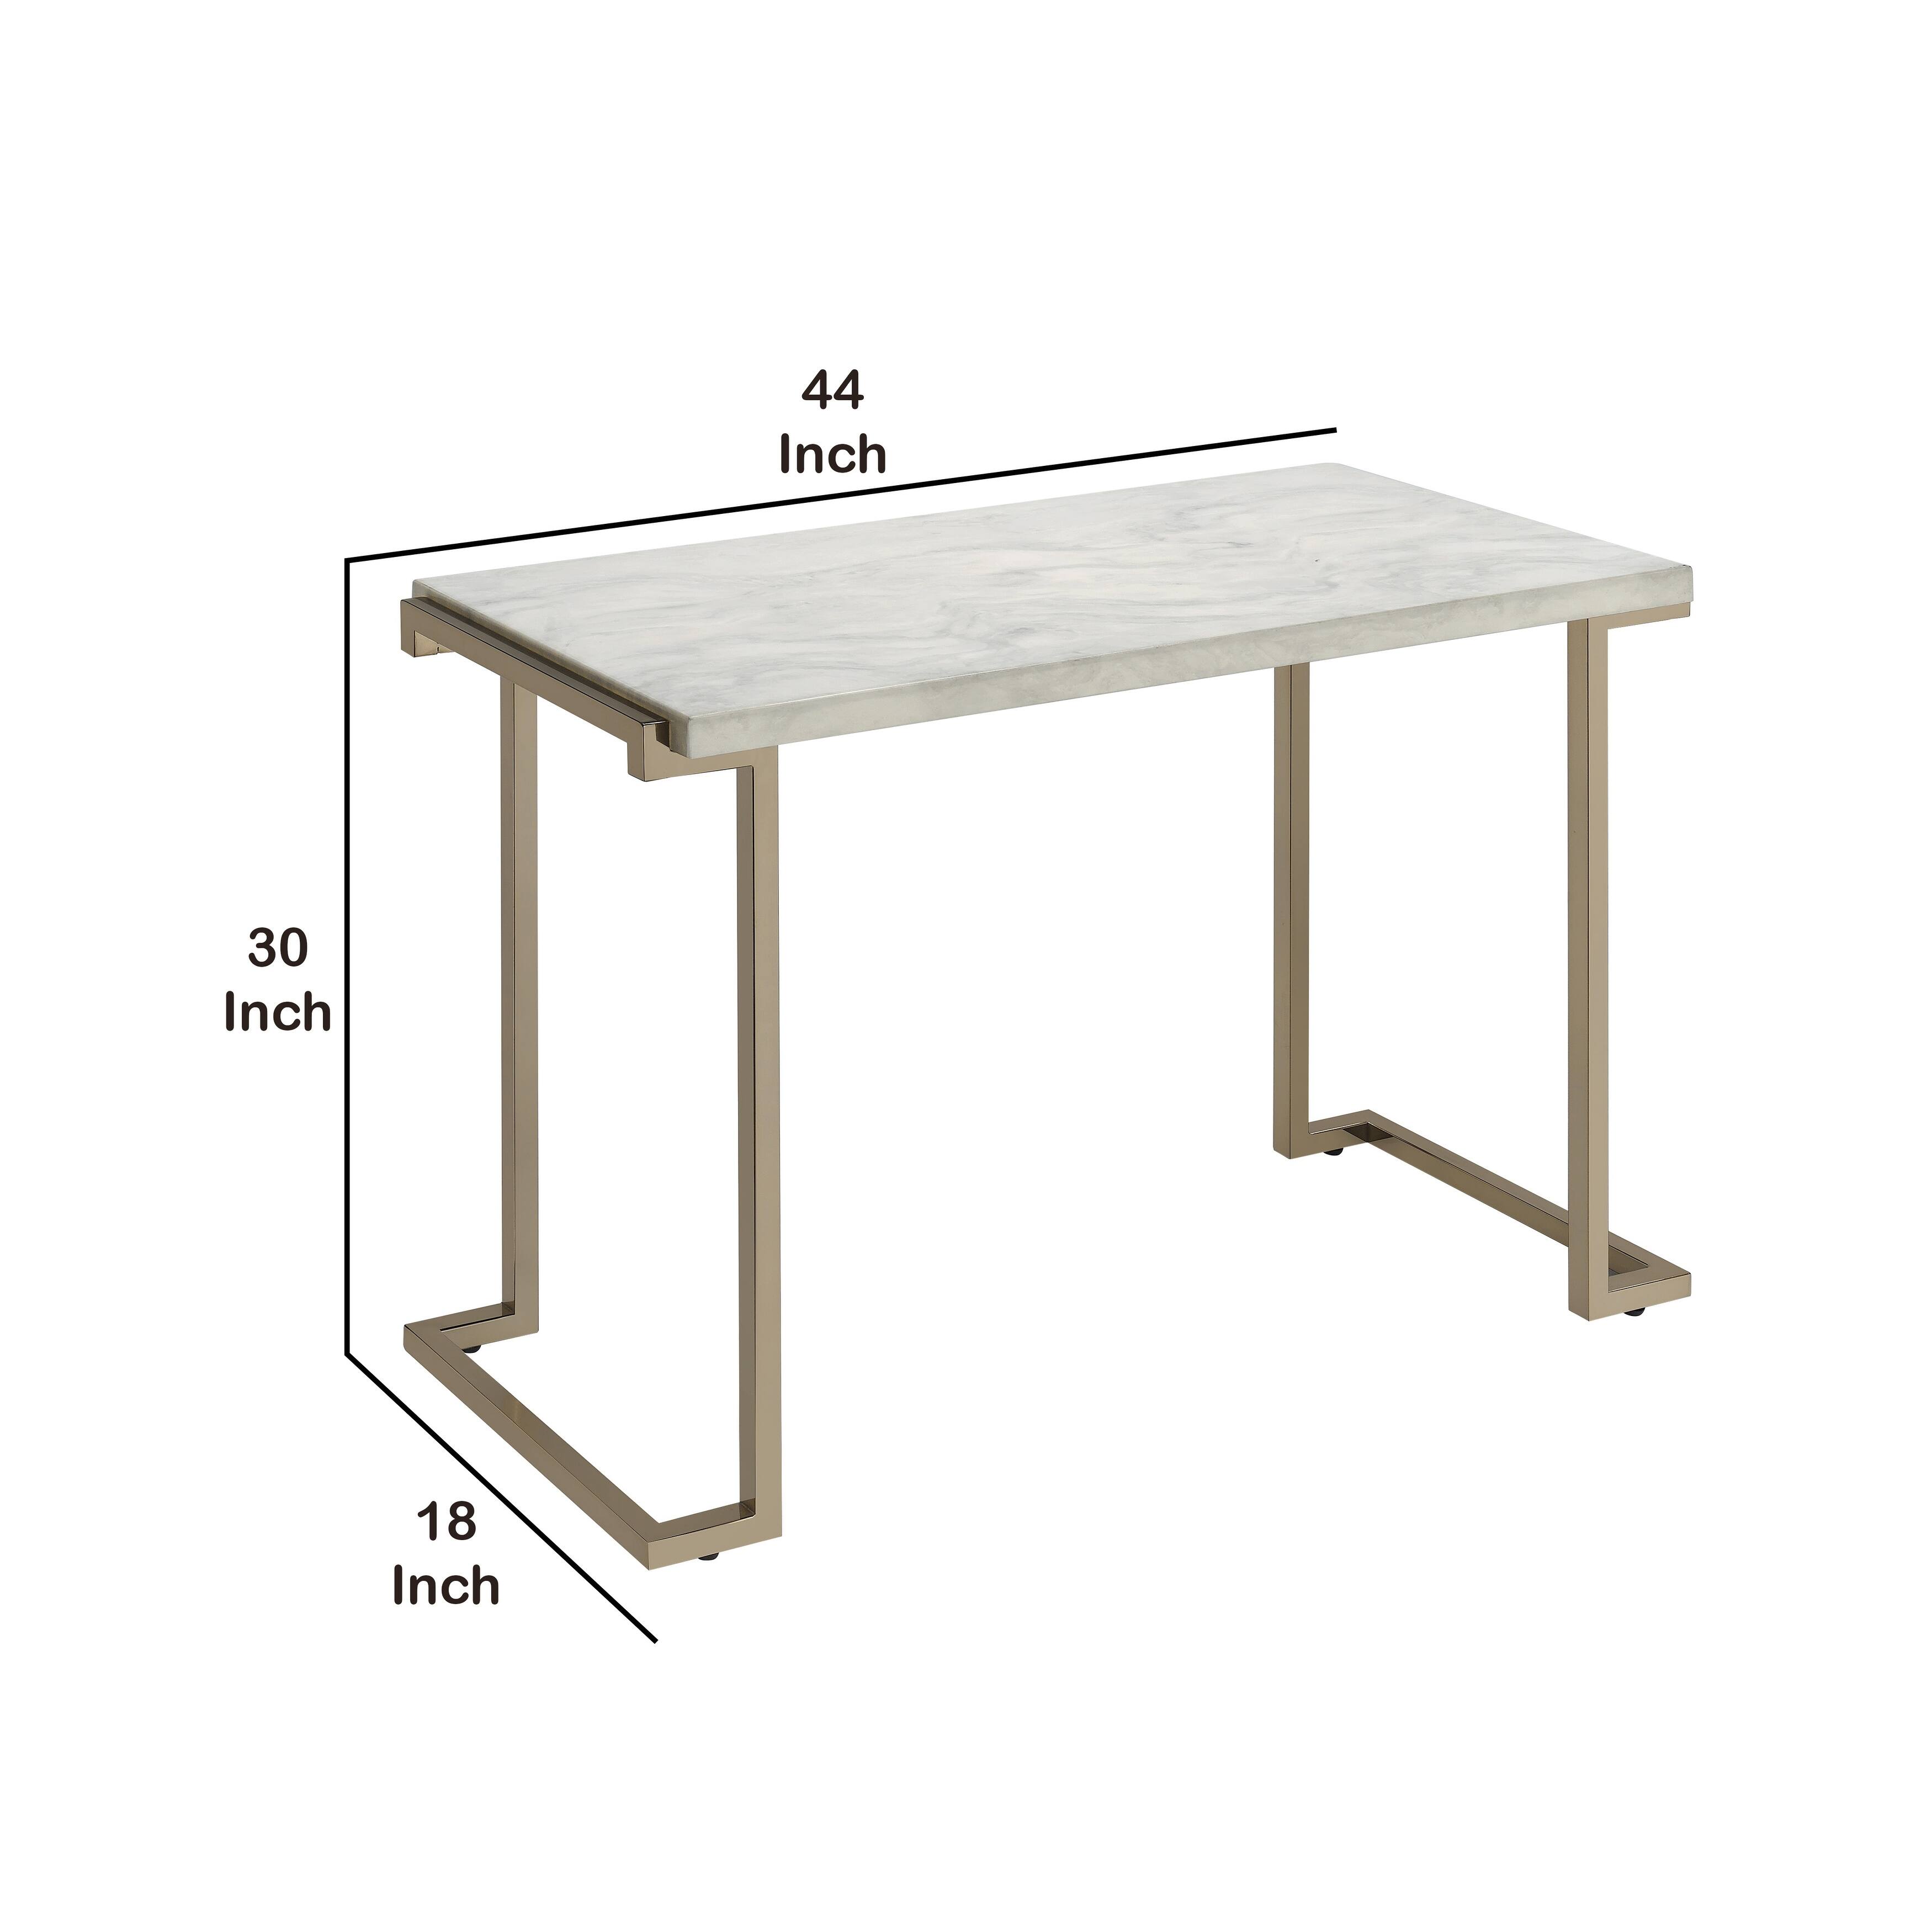 Contemporary Metal Frame Sofa Table with Faux Marble Top ,White and Gold - 30 H x 18 W x 44 L Inches